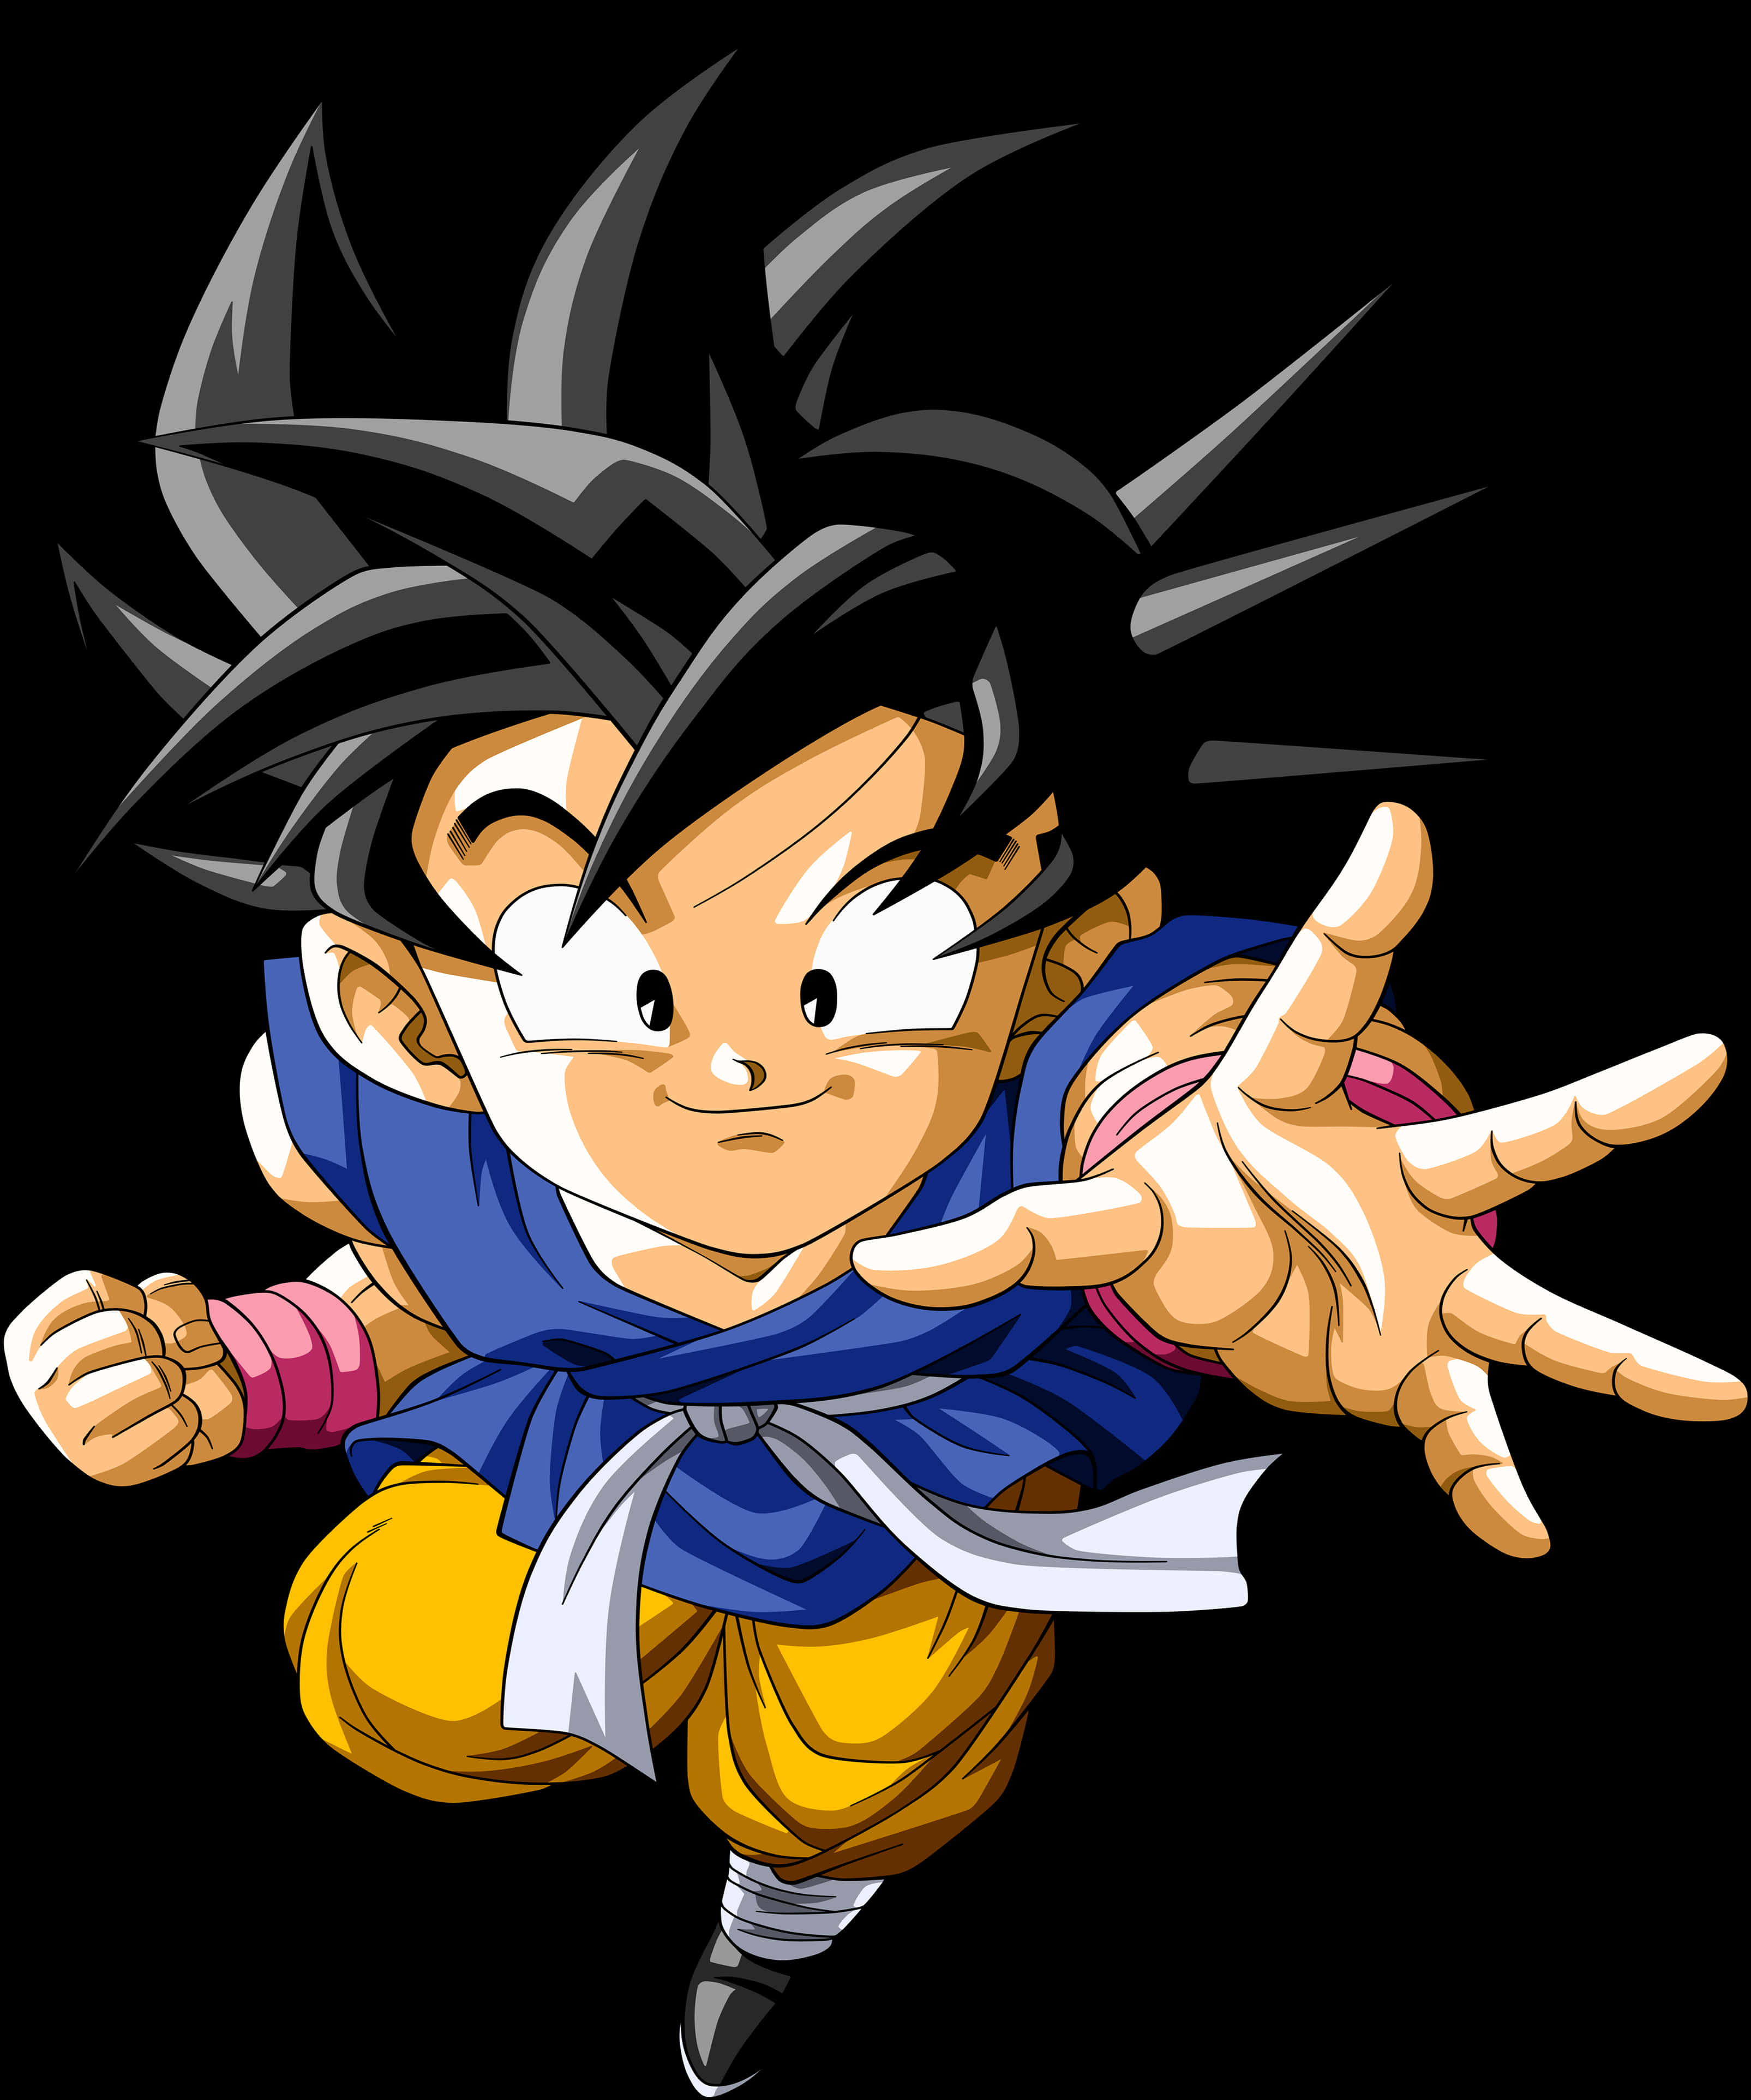 Cartoon Of A Boy With Black Hair And Spiky Hair PNG